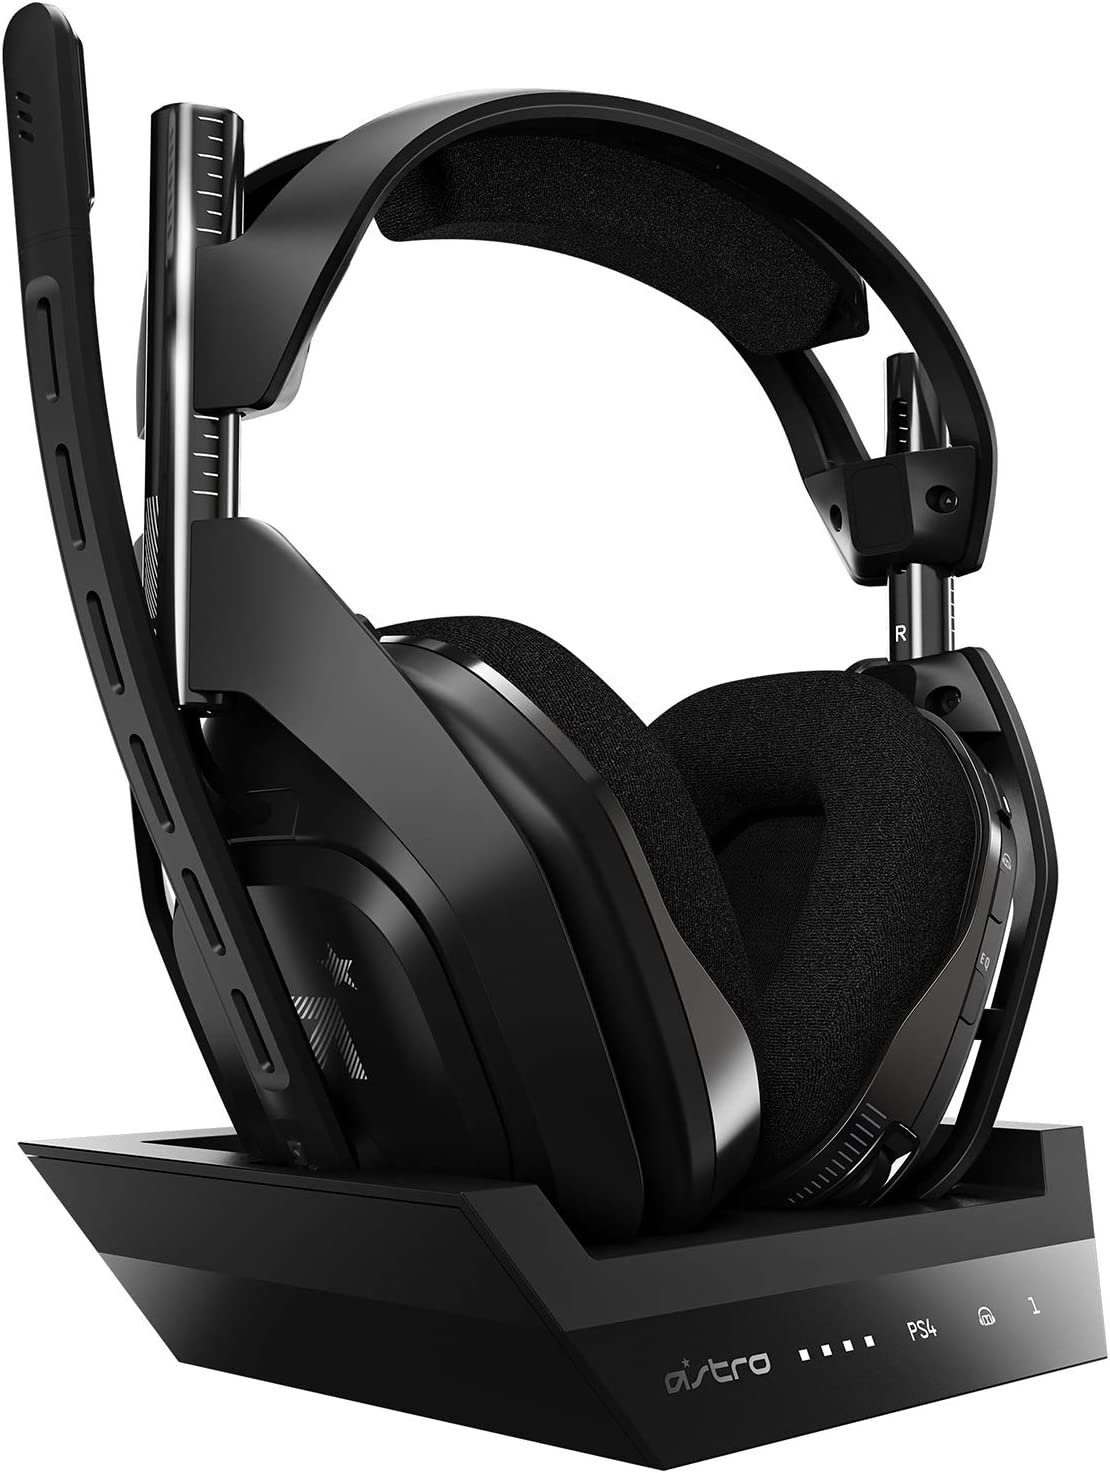 Gamingheadsets online kaufen » Gamer Headsets | OTTO